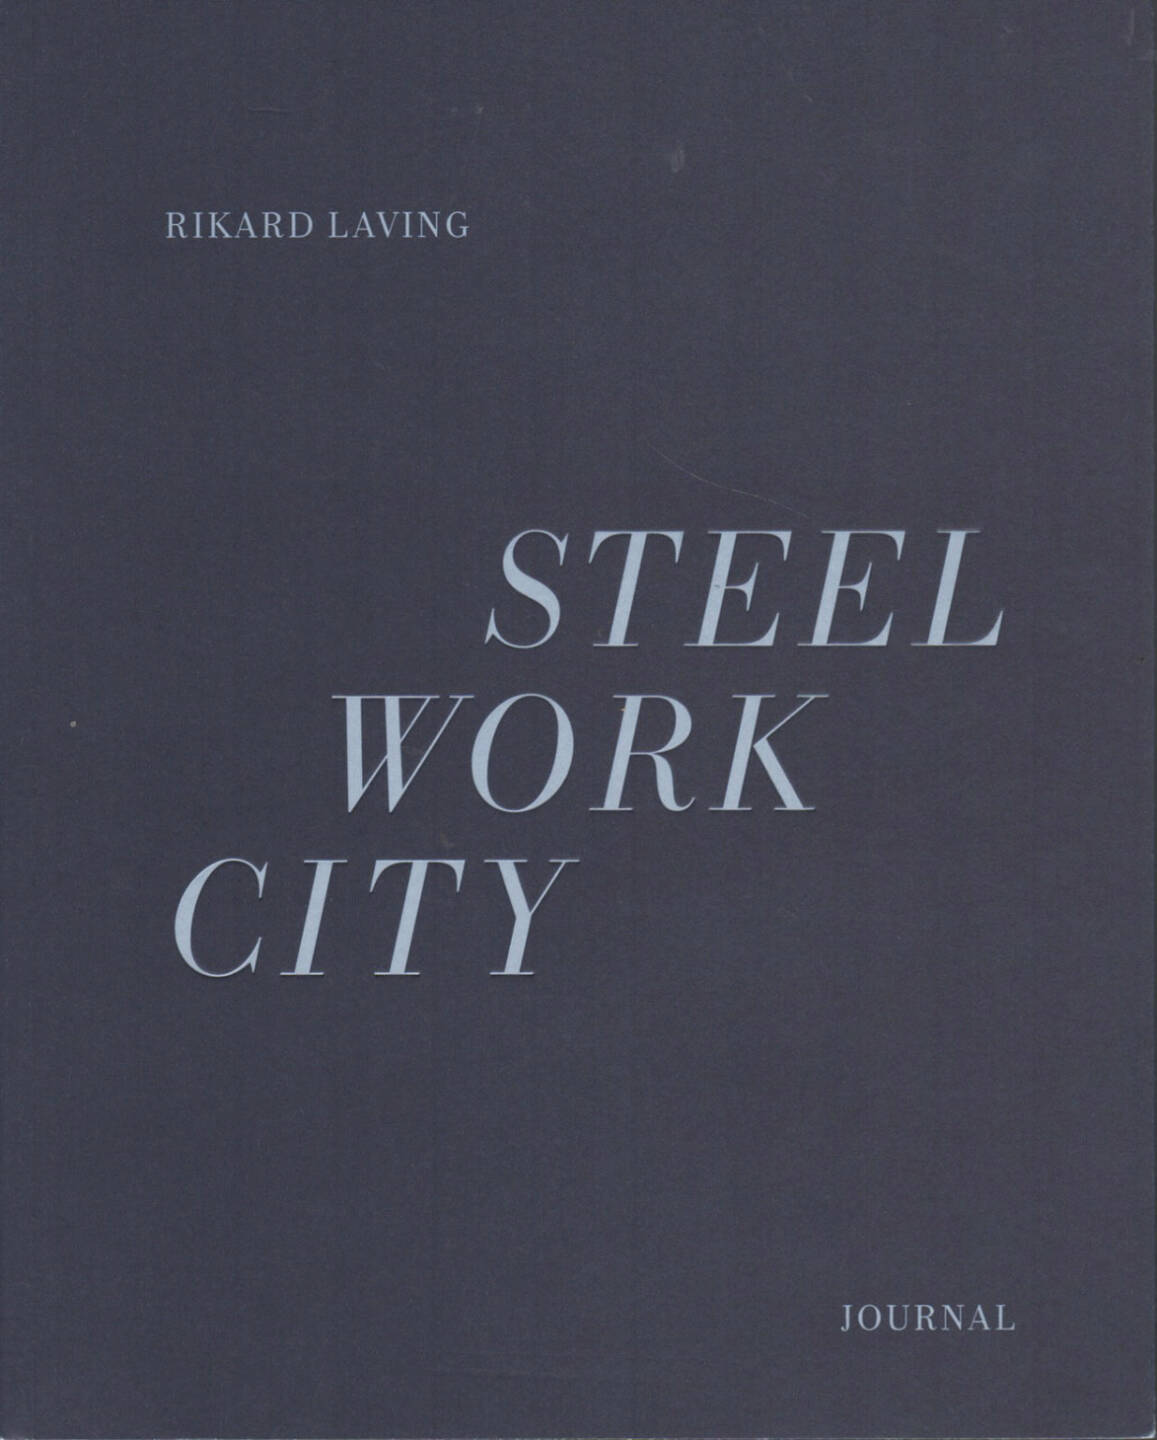 Rikard Laving - Steel / Work / City, Journal 2012, Cover - http://josefchladek.com/book/rikard_laving_-_steel_work_city